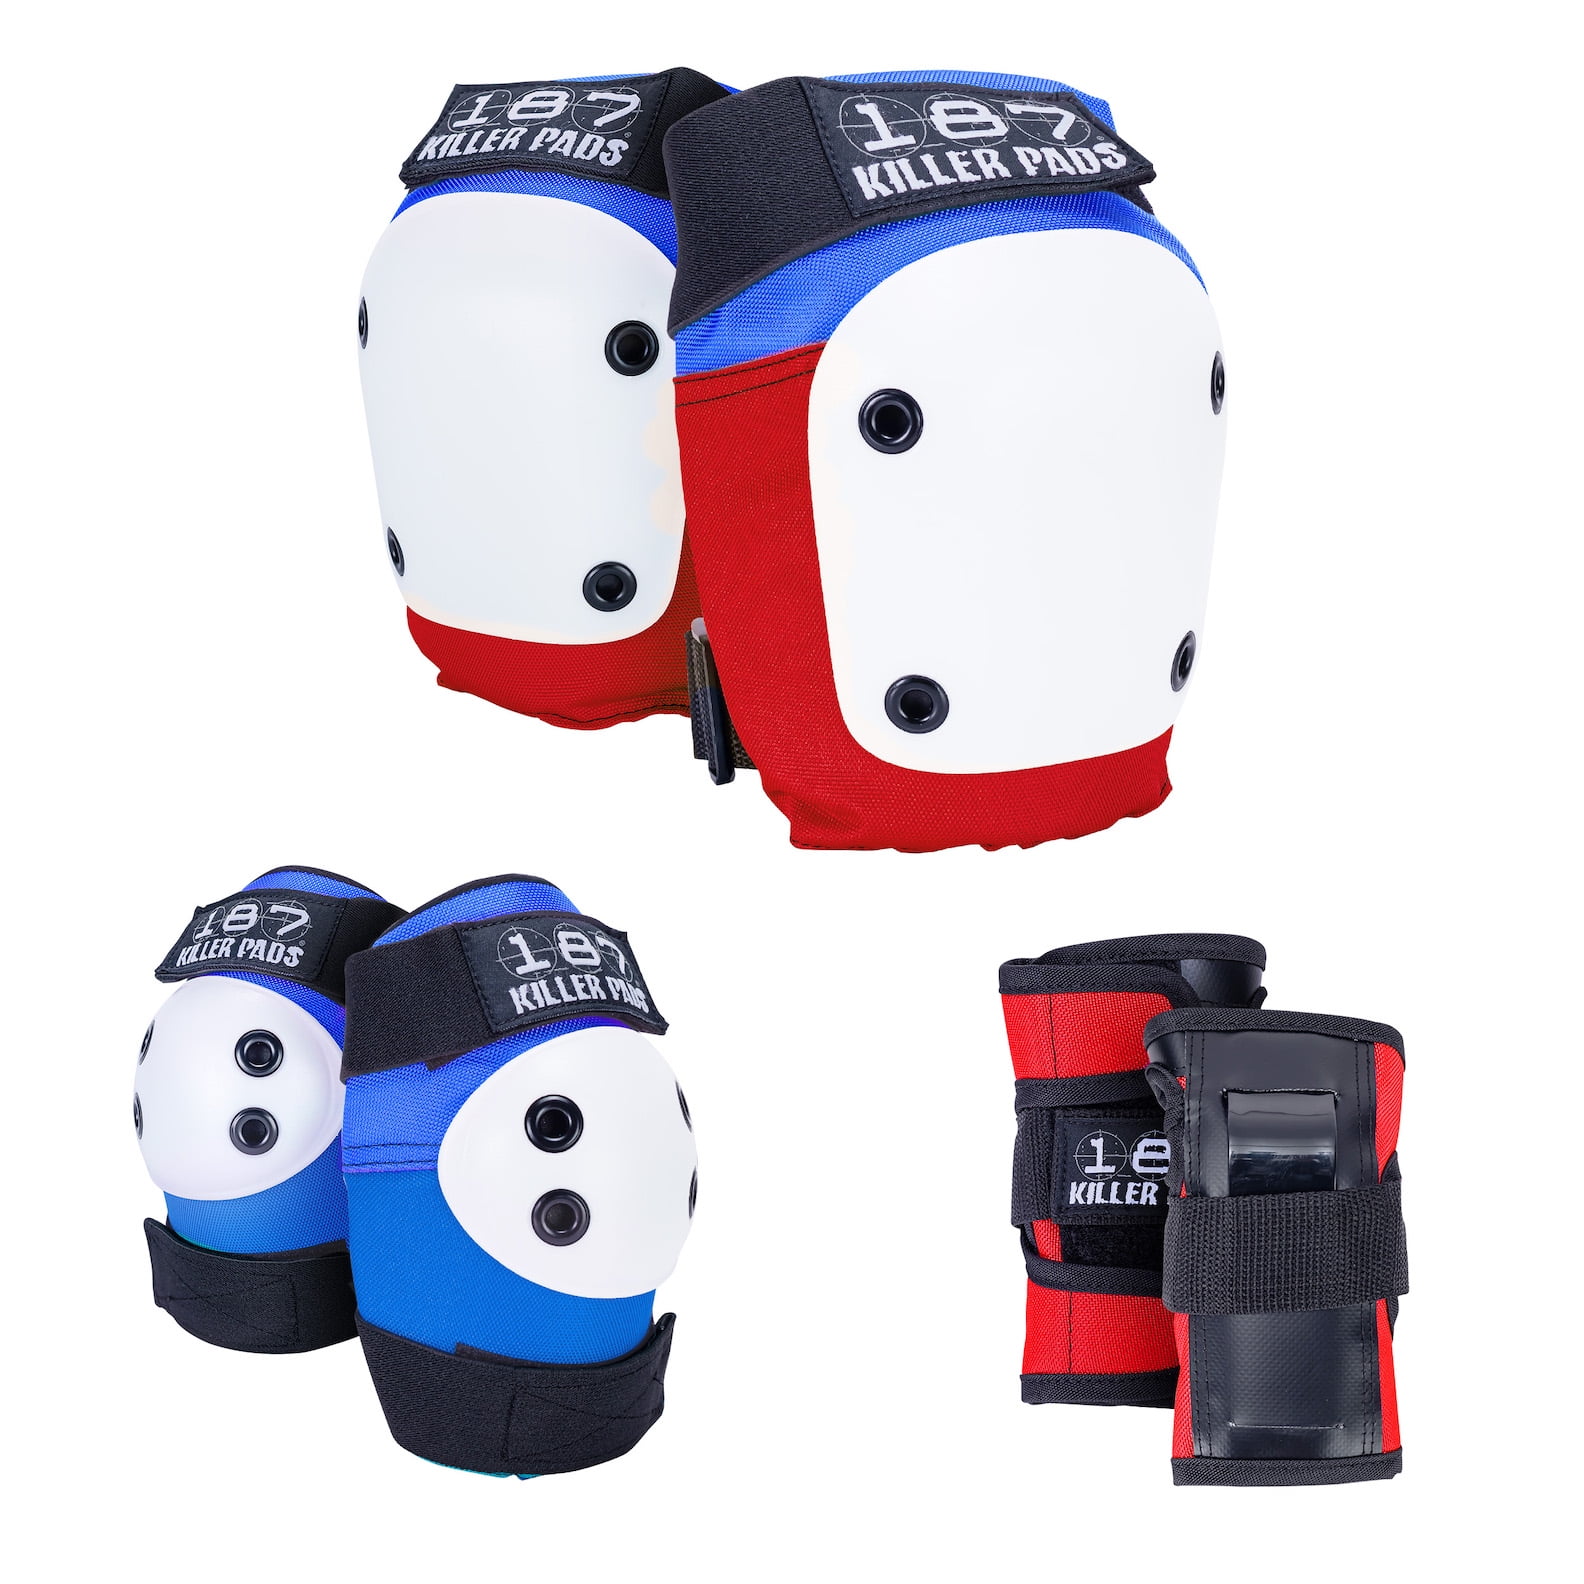 187 Killer Pads Six Pack Knee and Elbow Pads, Red/White/Blue, Junior -  Walmart.com